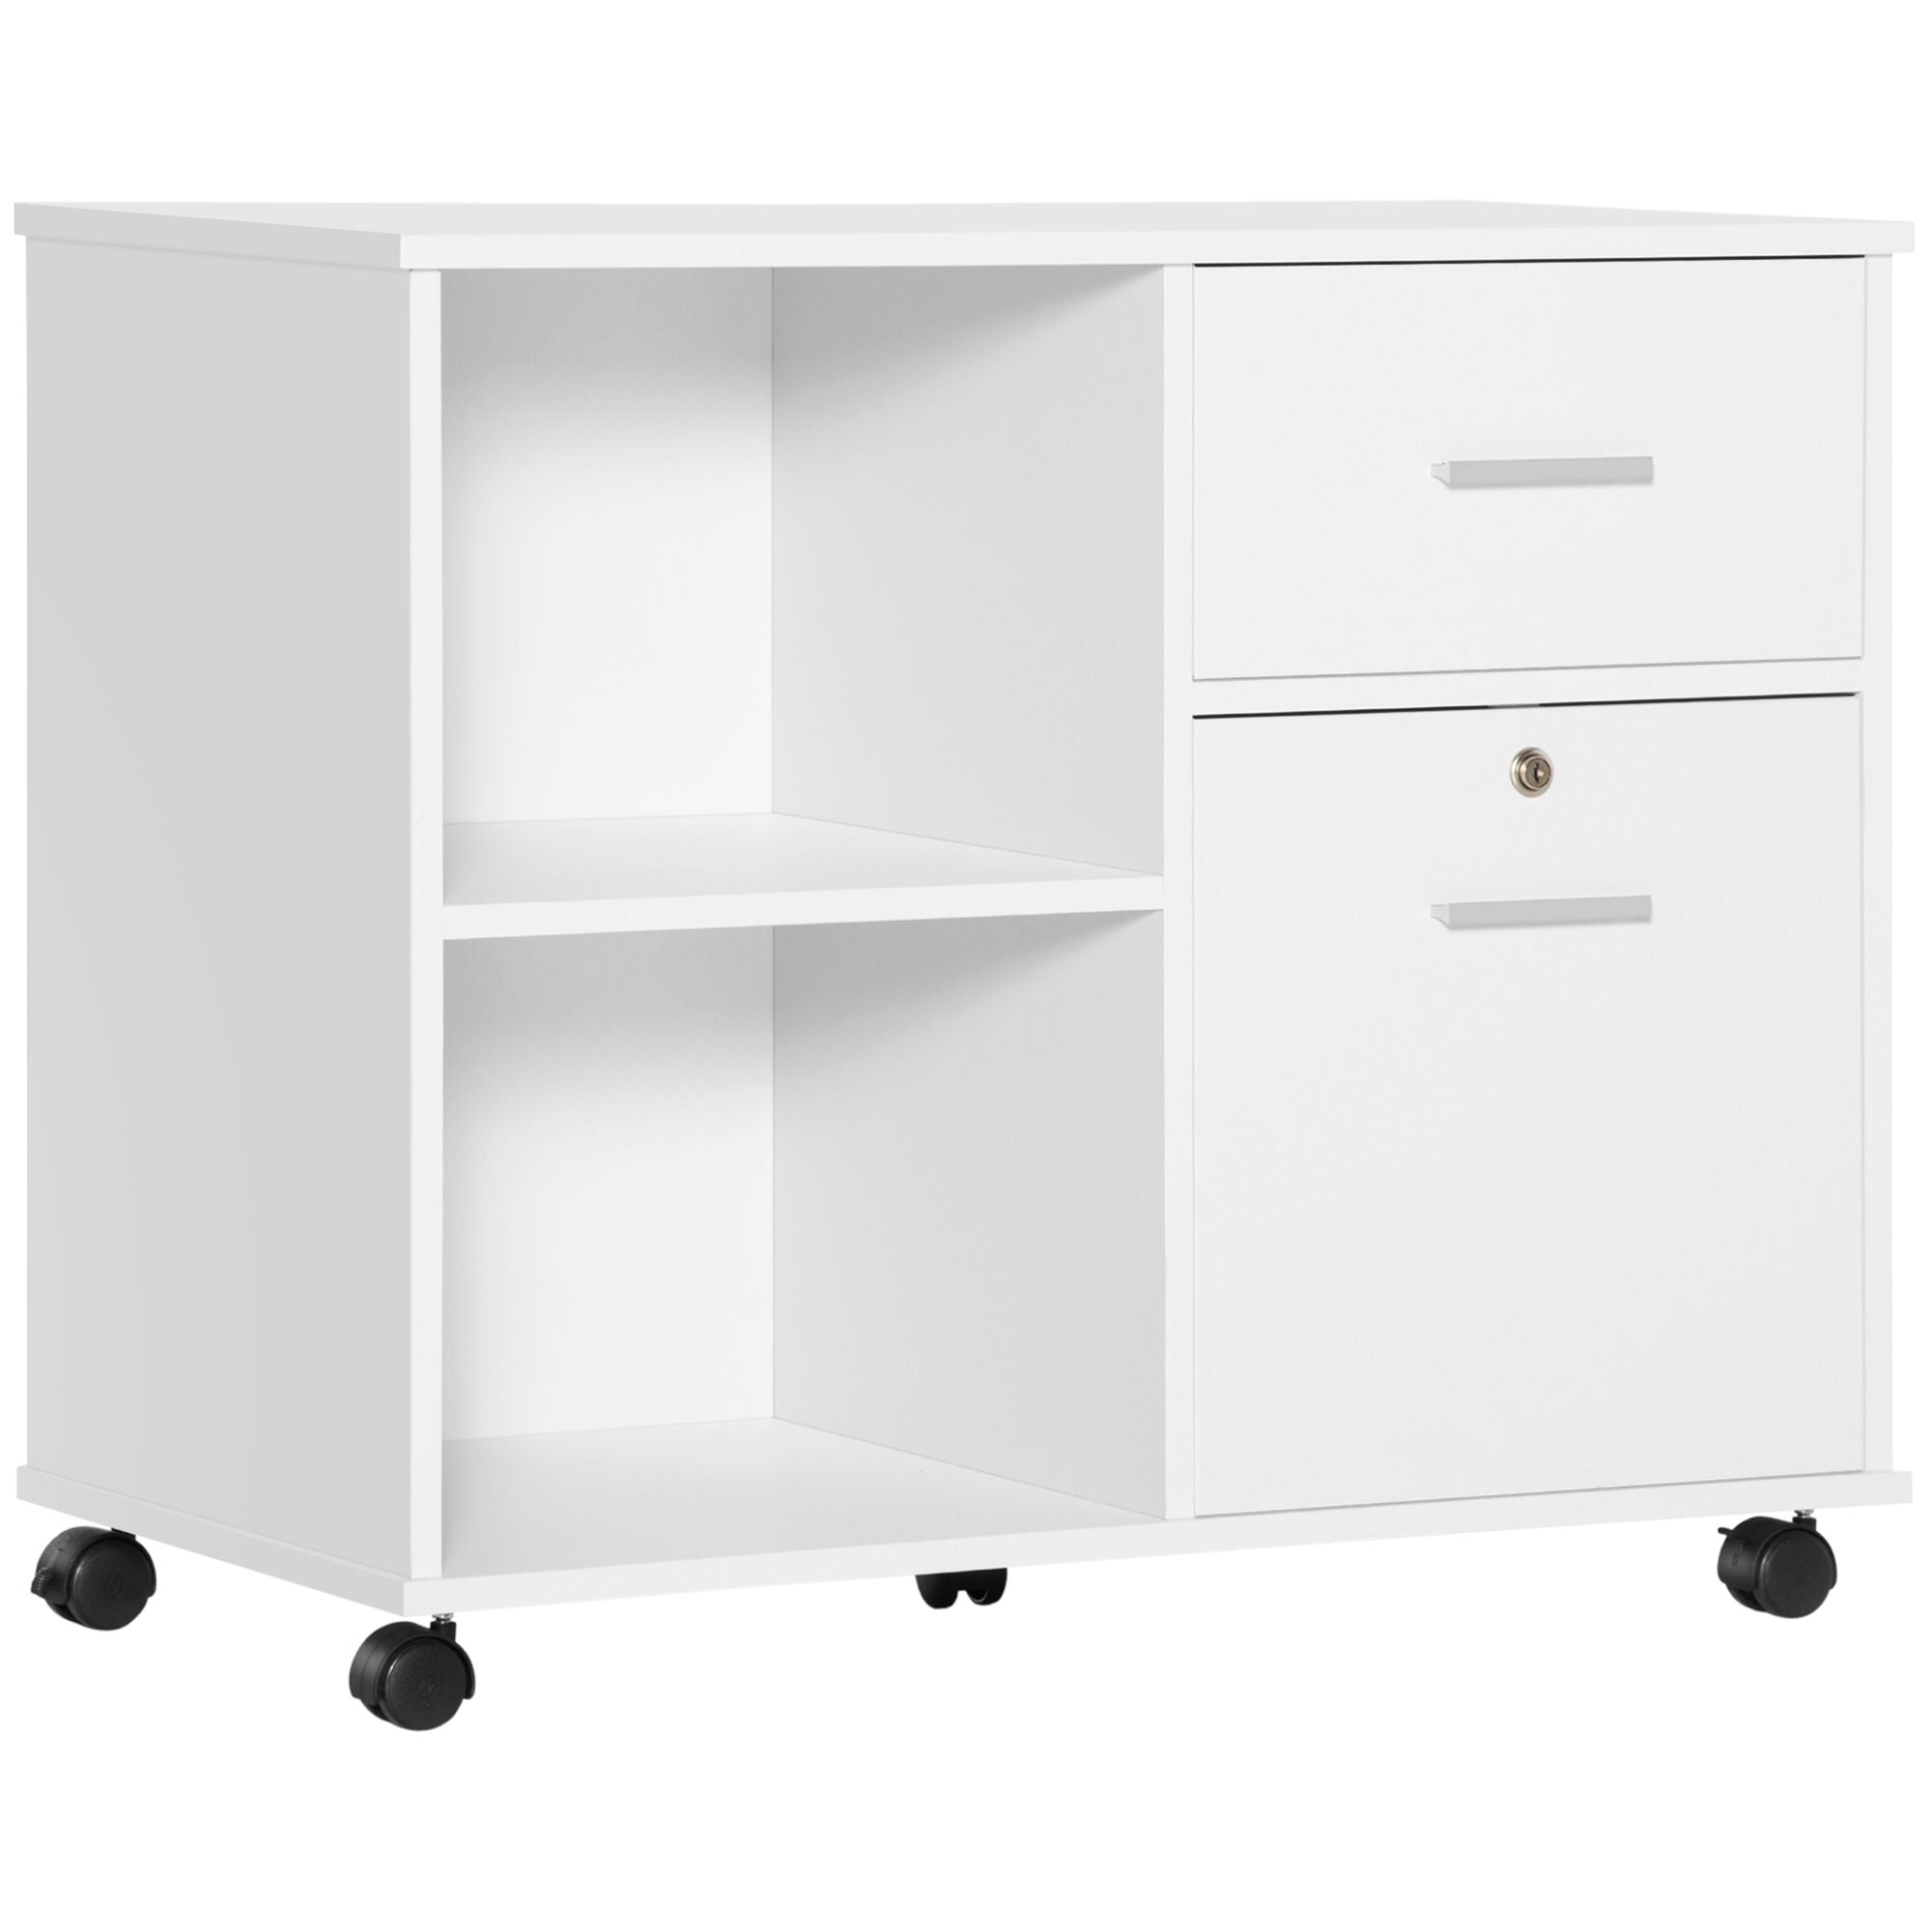 ProperAV Mobile Lockable Printer Stand Filing Cabinet with Wheels (White)